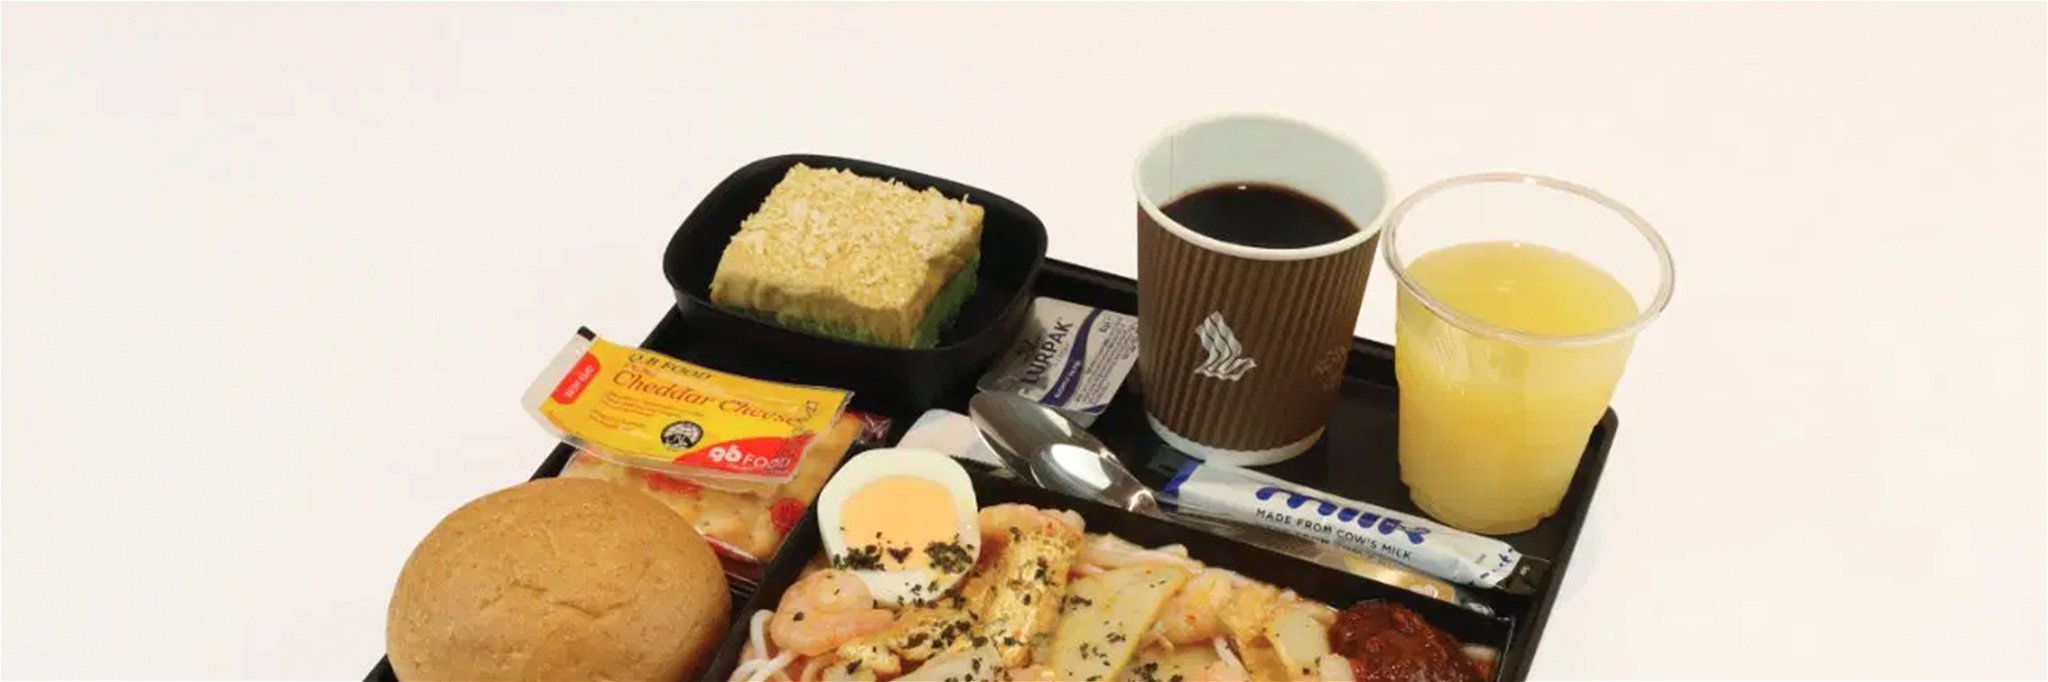 Paper-based serviceware by Singapore Airlines